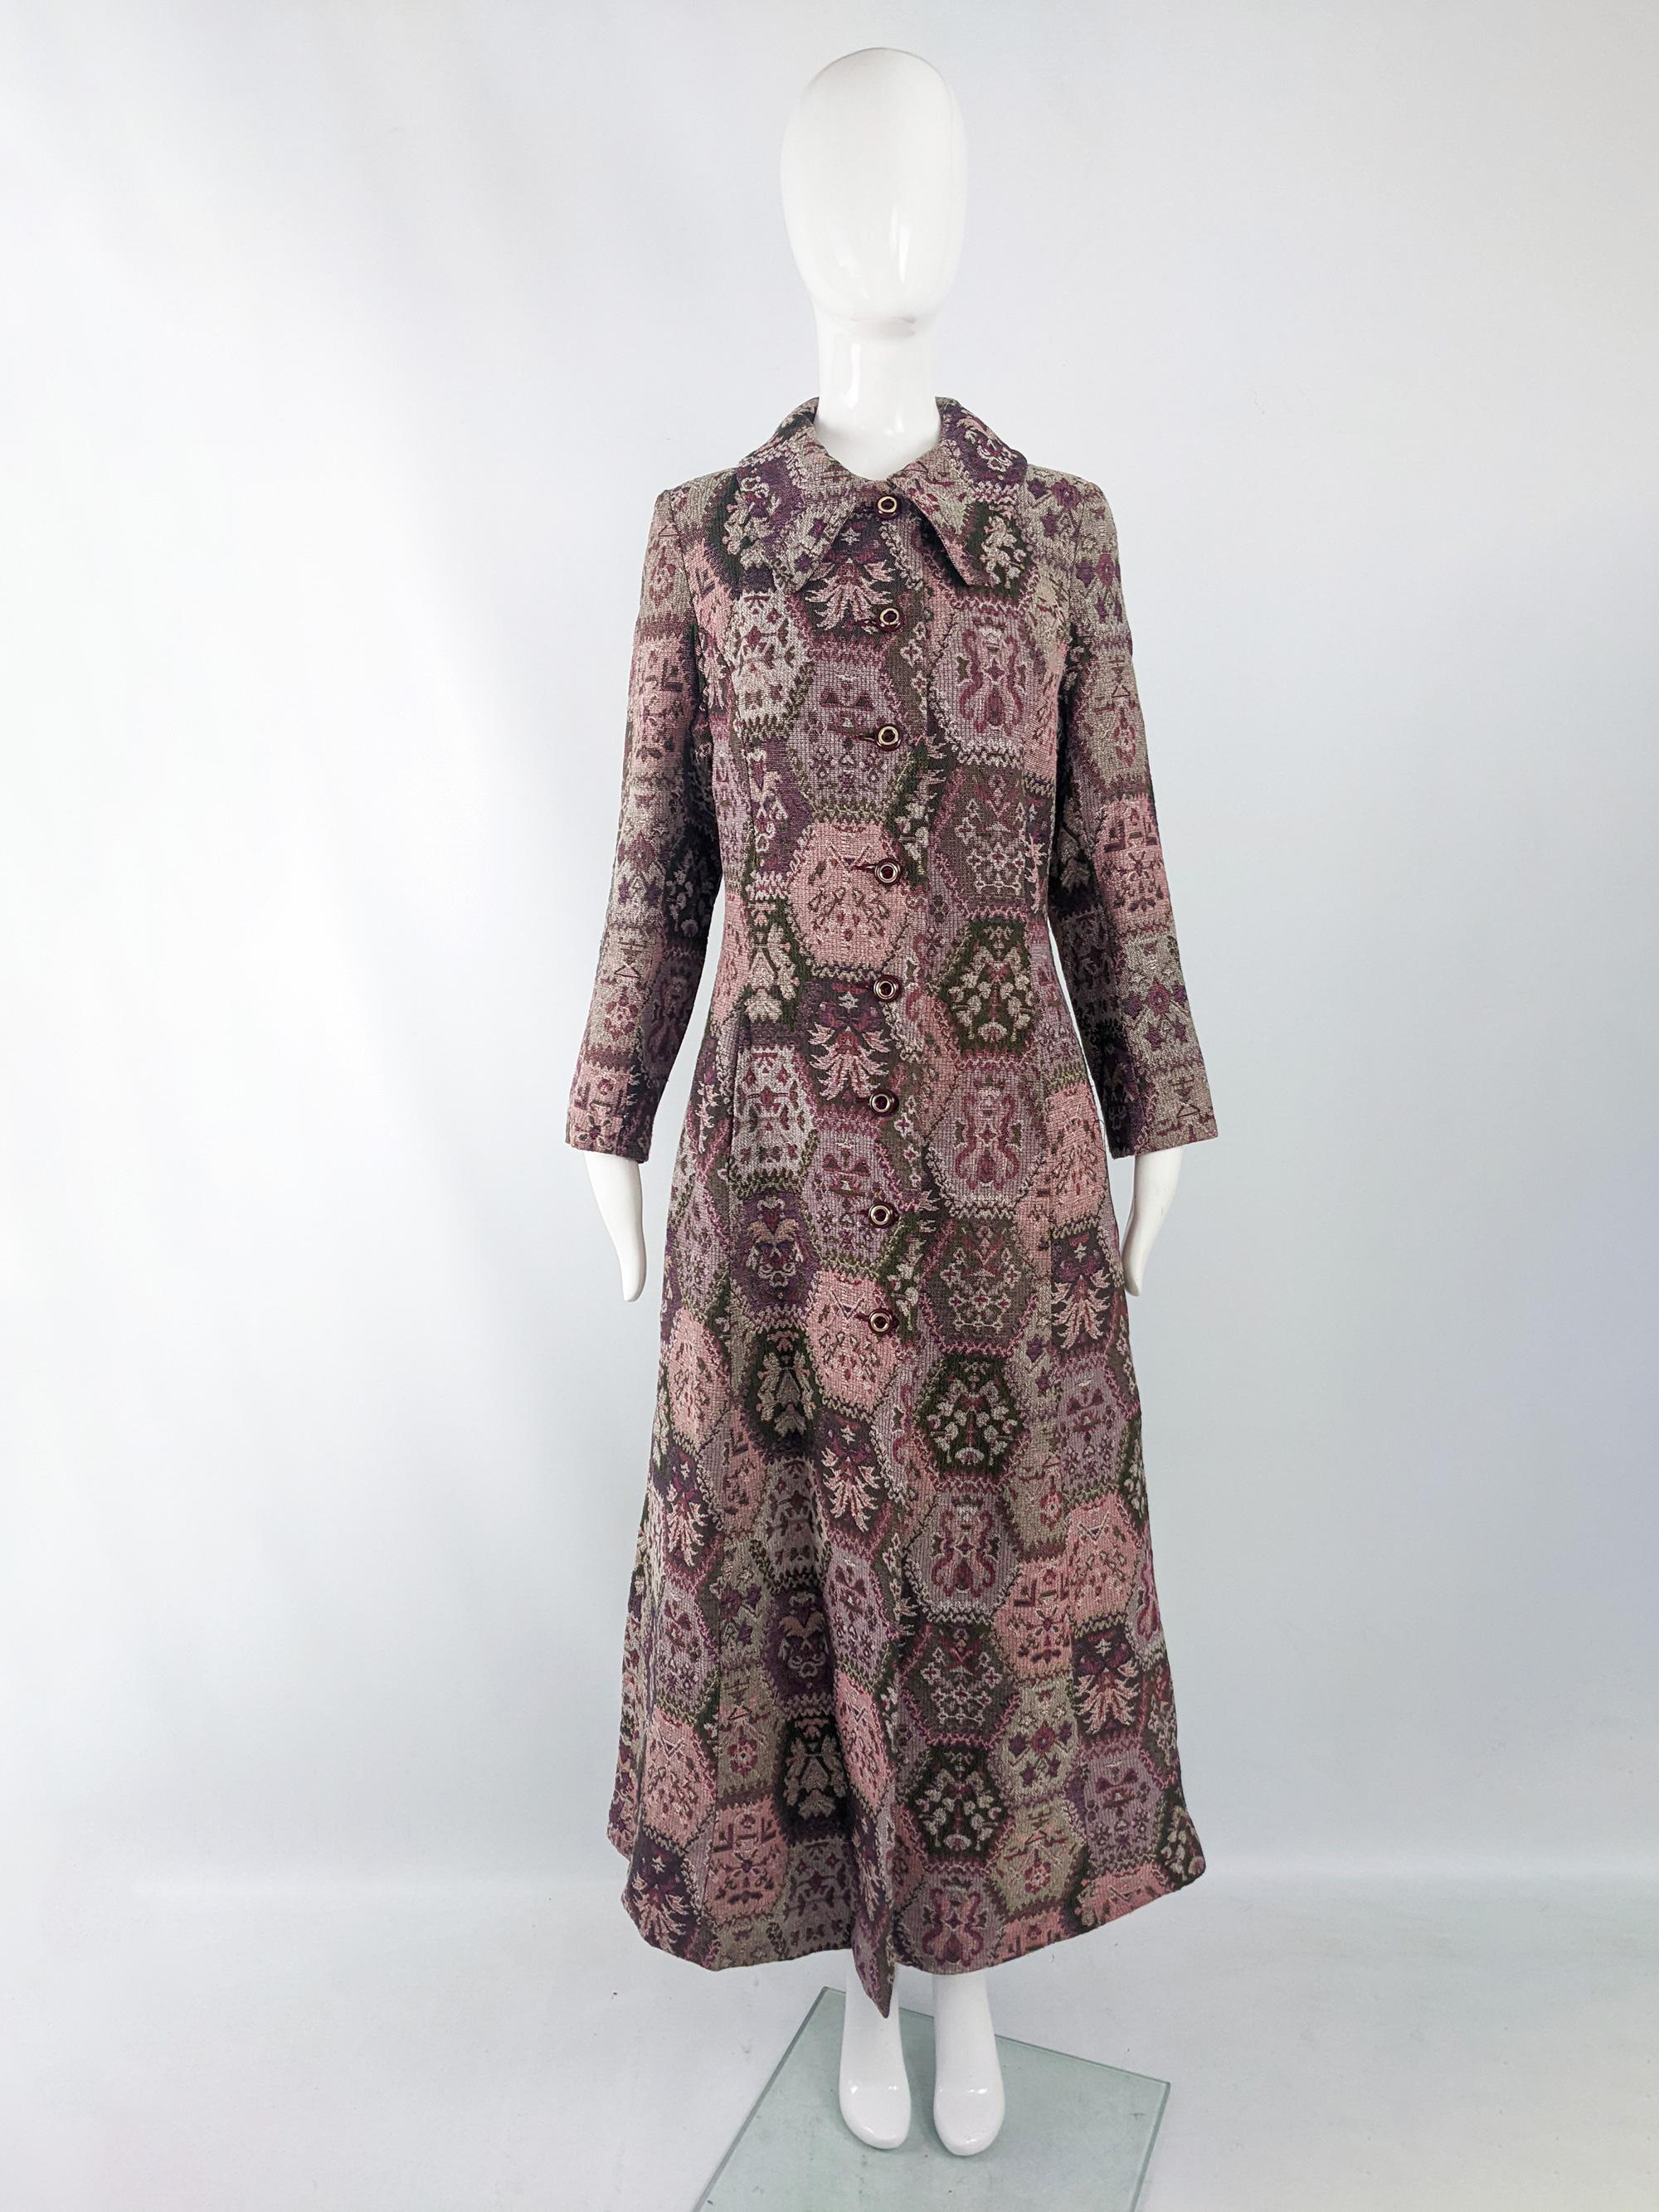 An incredible and rare vintage womens maxi coat from the late 60s / early 70s. In a beautiful tapestry fabric with a rounded collar and a long, column like cut - making the most of the wonderful fabric.

Size: Unlabelled; measures roughly like a